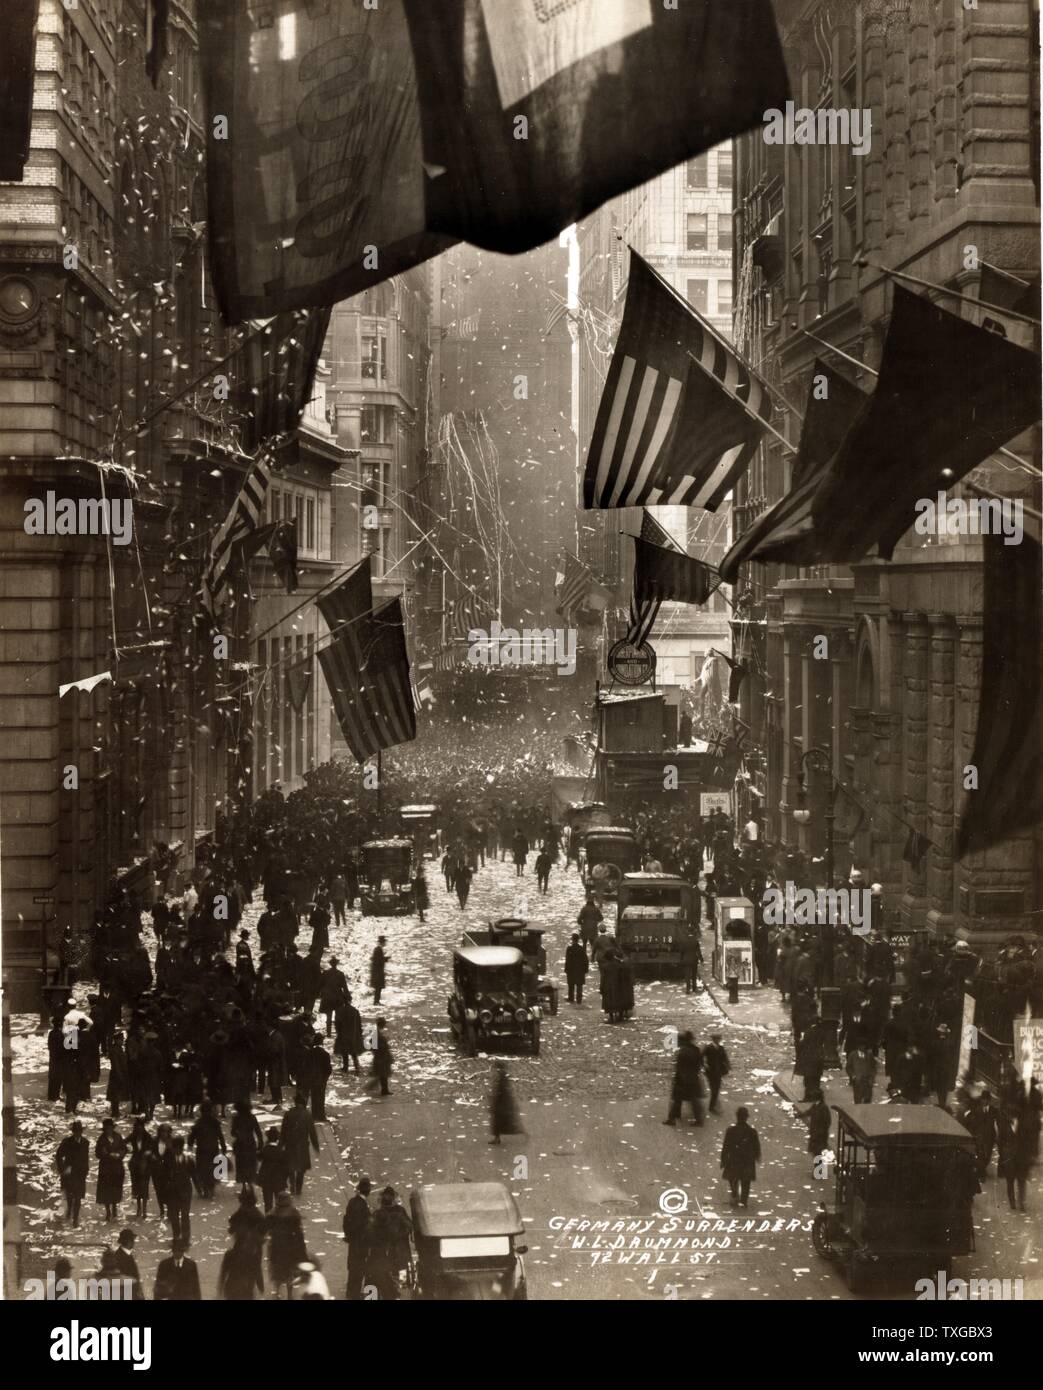 Germany surrenders. Photograph shows celebrations on Wall Street with confetti, American flags, and crowds of people. Stock Photo